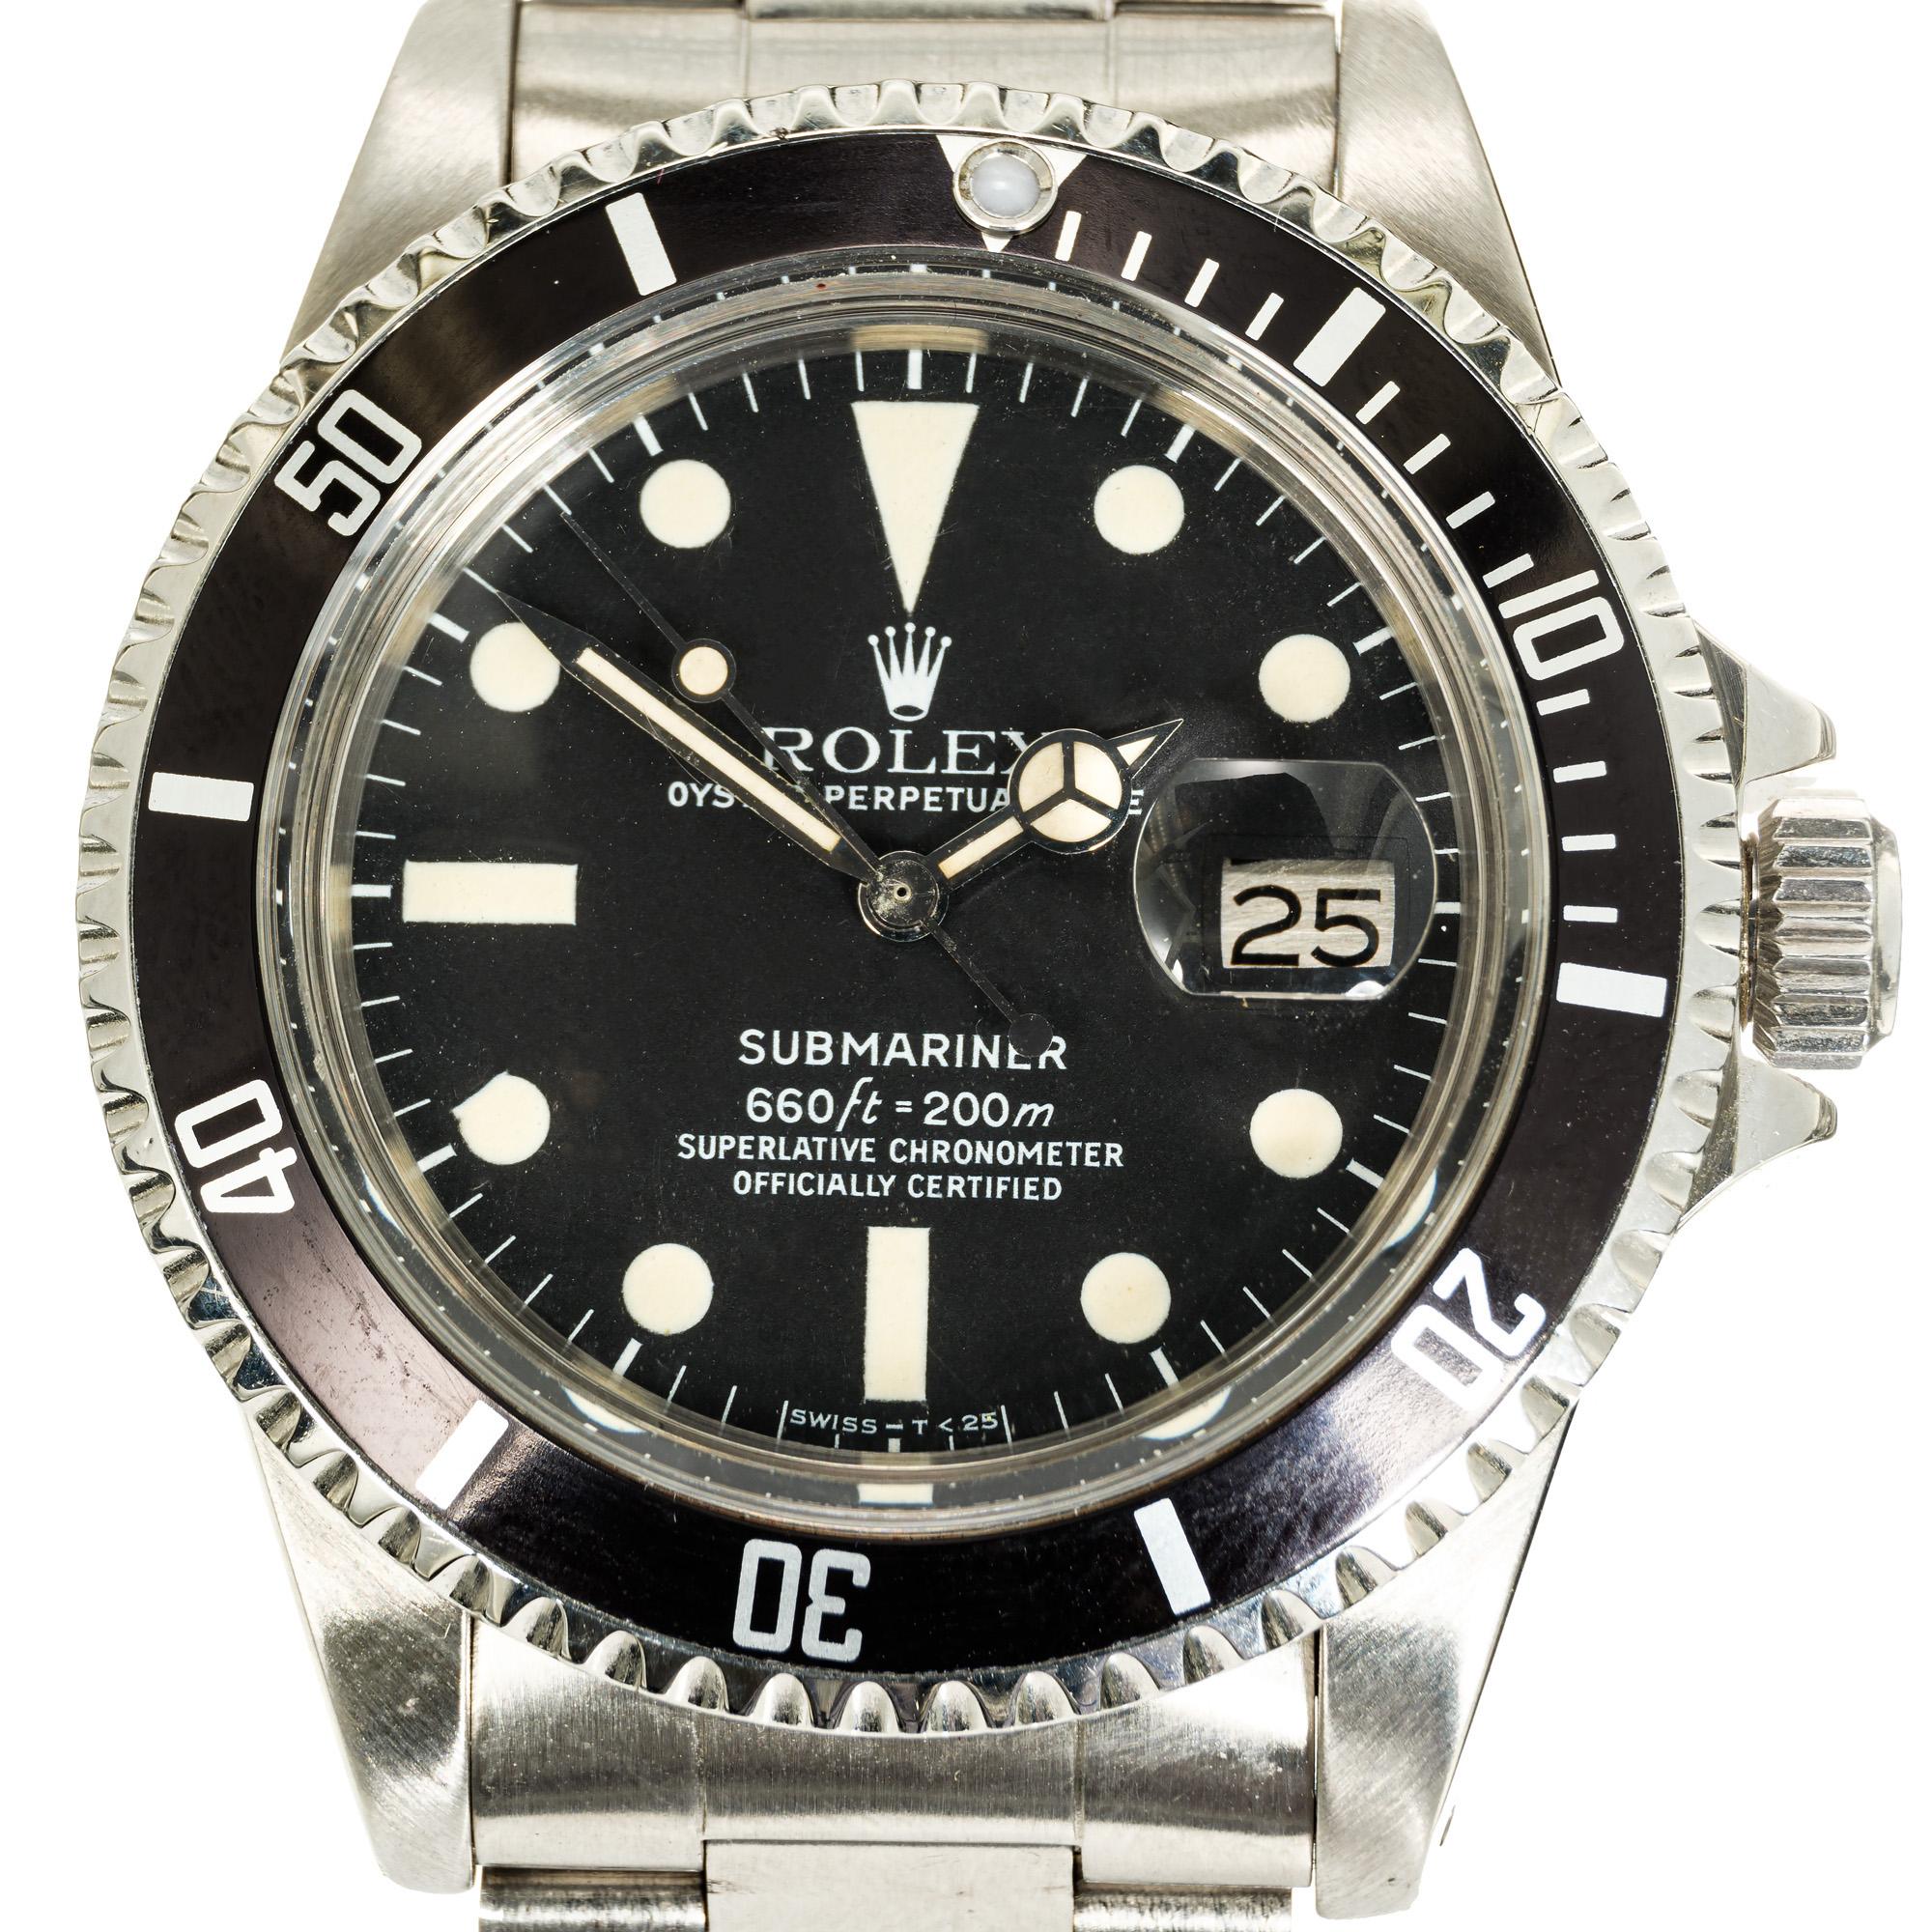 Restored, refinished and guaranteed vintage 1979 Rolex submariner ref 1680.  8 Inches and can be shortened. Original Rolex matt finish black dial with stainless steel Oyster band. Box and papers included. Serial# 6154173

Length: 47mm
Width: